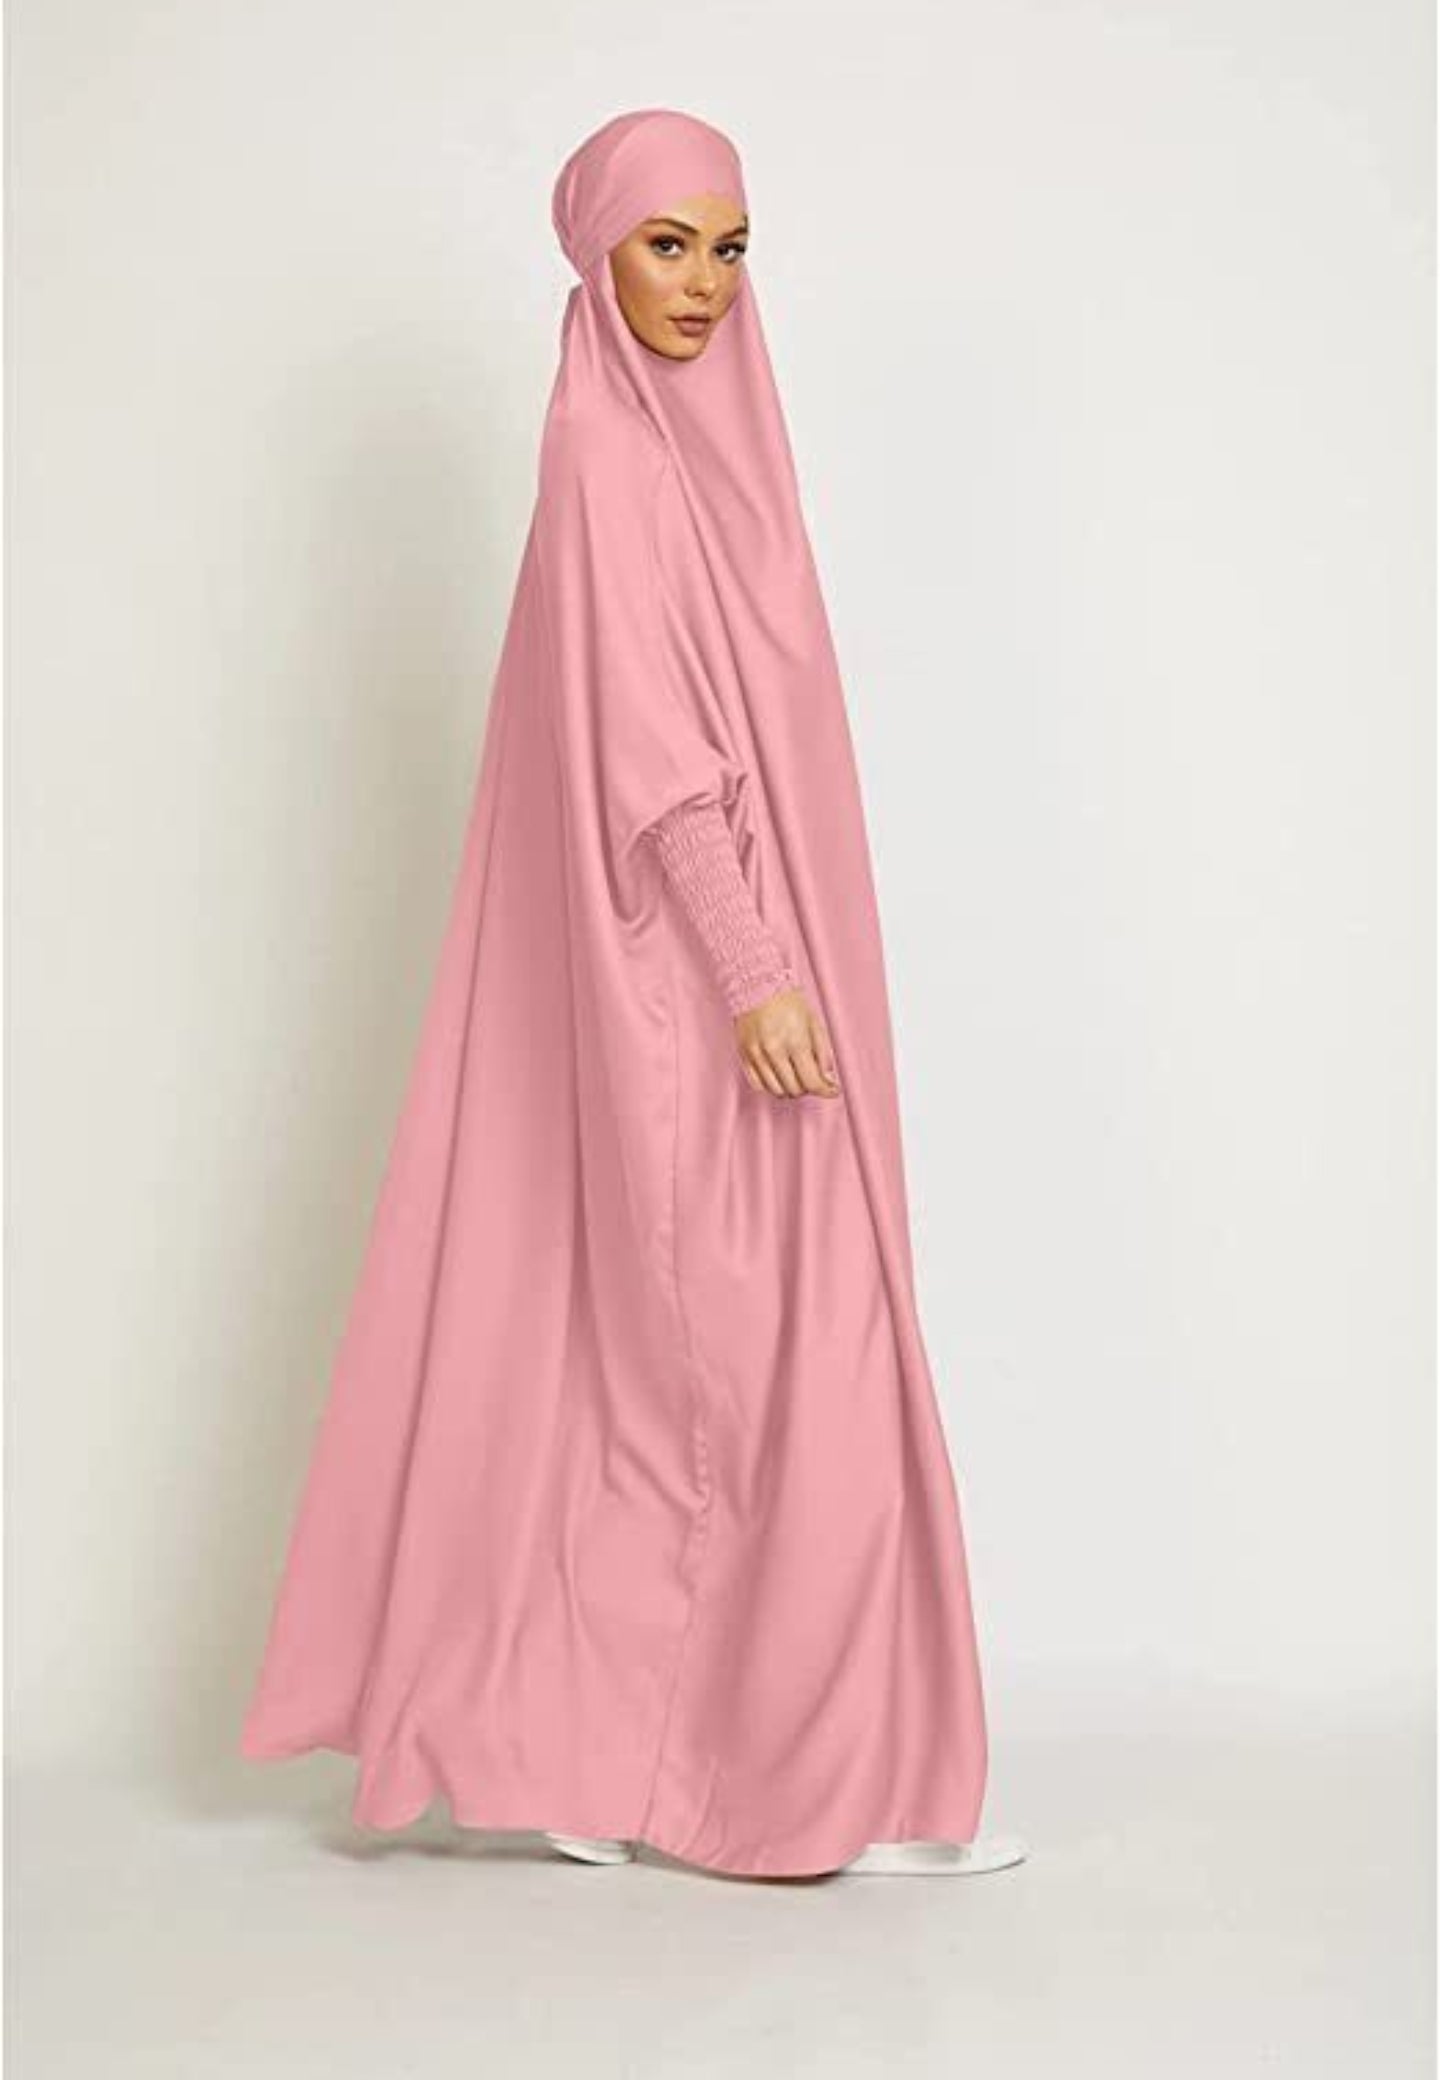 Discover elegance in every fold with Hikmah Boutique's Exclusive One-Piece Tie-Back Prayer Jilbab with Sleeves. Elevate your modest fashion with our exquisite design, offering versatile colors, tie-back feature, and affordable luxury. Embrace timeless elegance exclusively available at Hikmah Boutique.